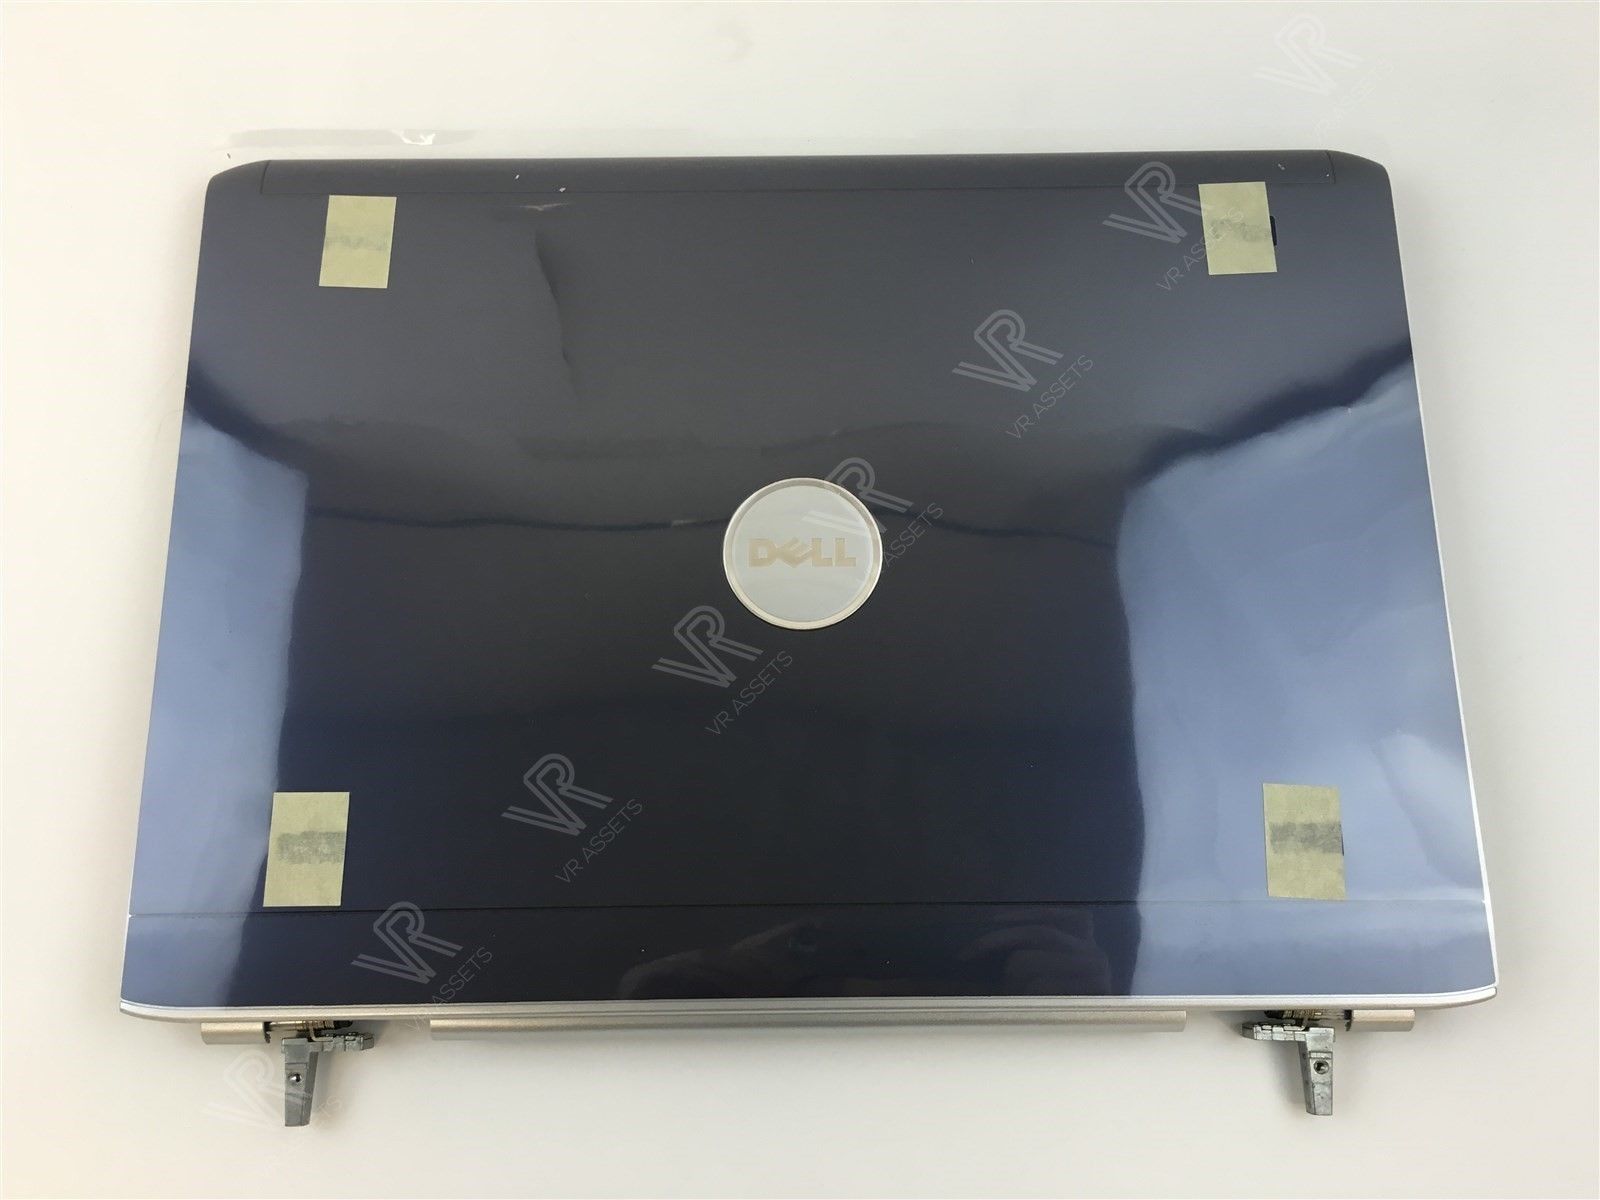 Genuine Dell Inspiron 1500 1520 1521 Blue LCD Back Cover Lid Hinges YY039 0YY039